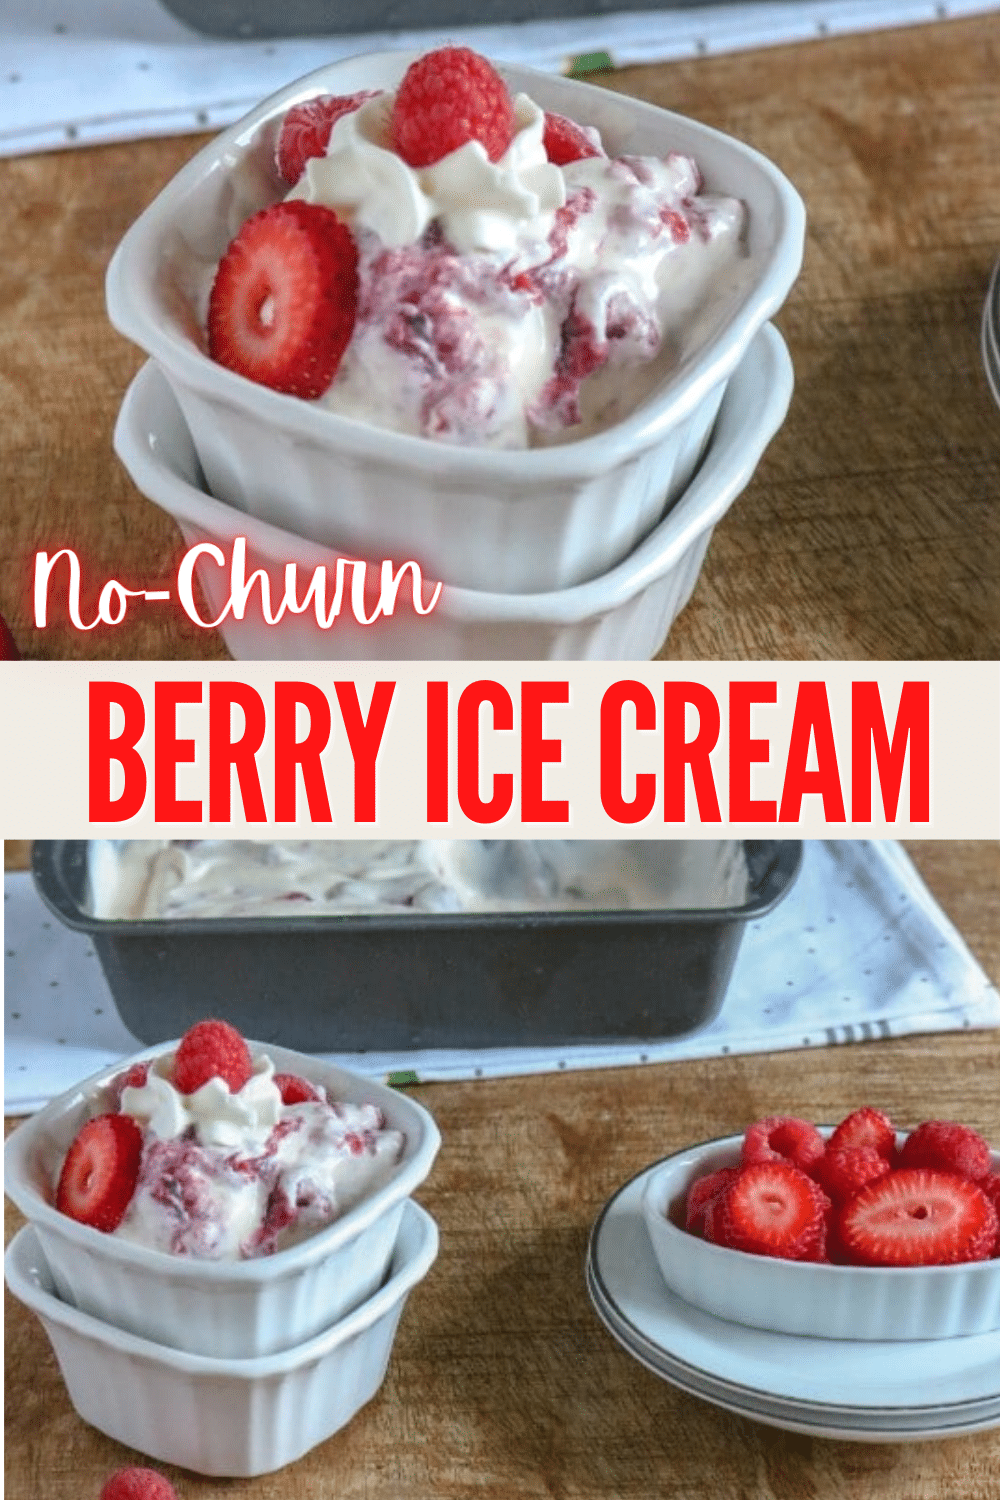 This homemade no-churn berry ice cream is SO easy to make -- you just need 4 ingredients! It's the perfect summer treat! #easydesserts #icecream via @wondermomwannab